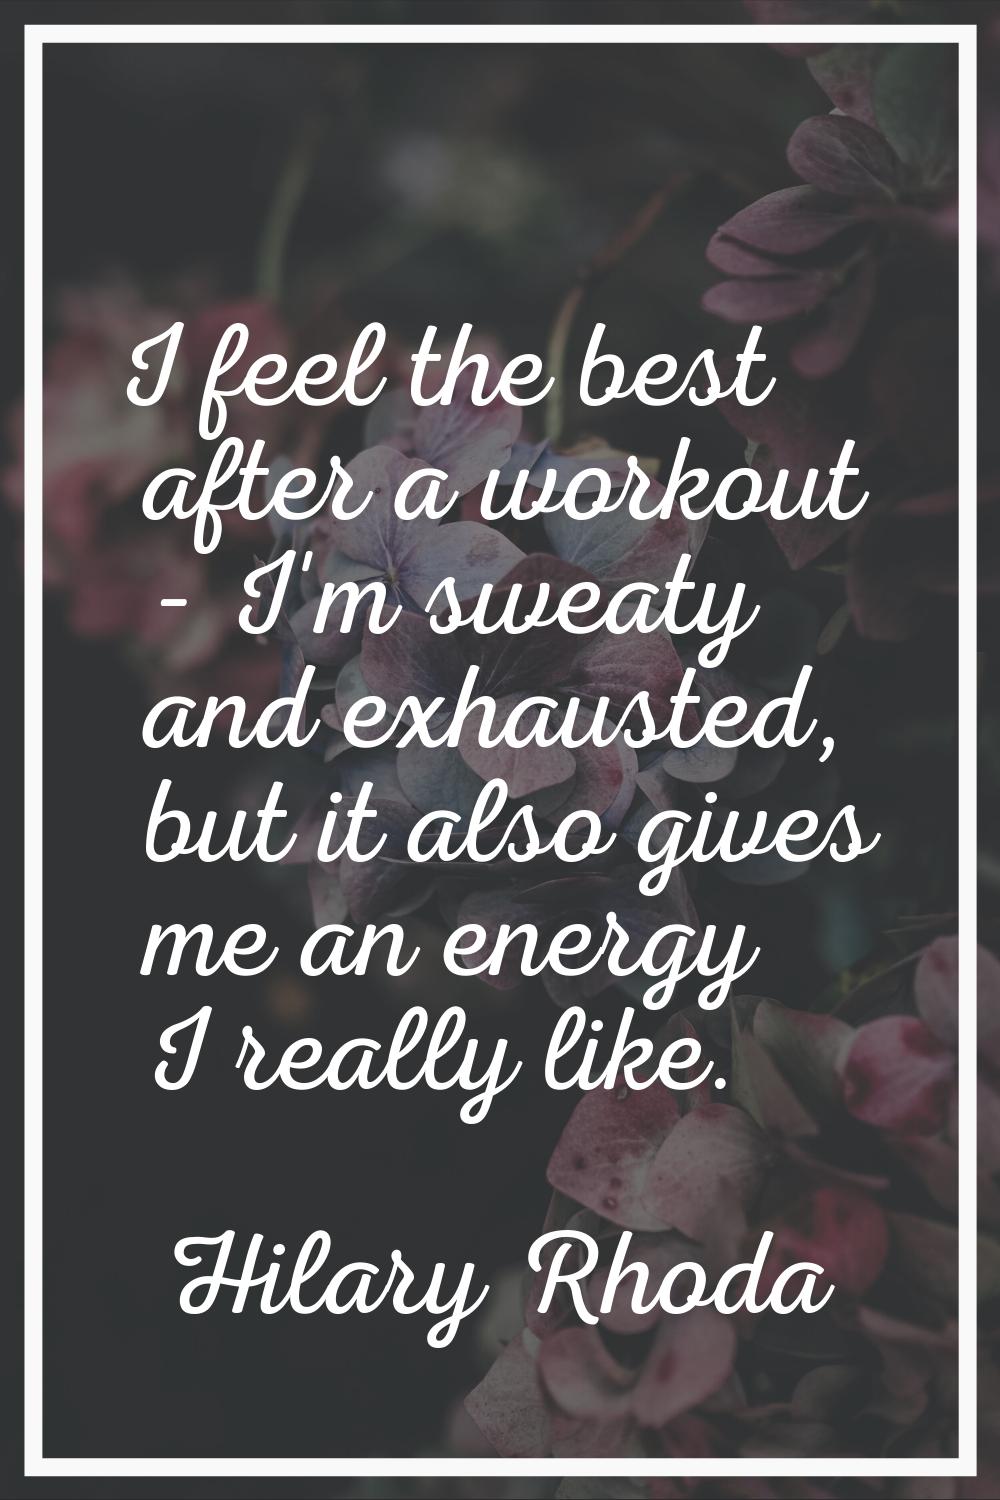 I feel the best after a workout - I'm sweaty and exhausted, but it also gives me an energy I really